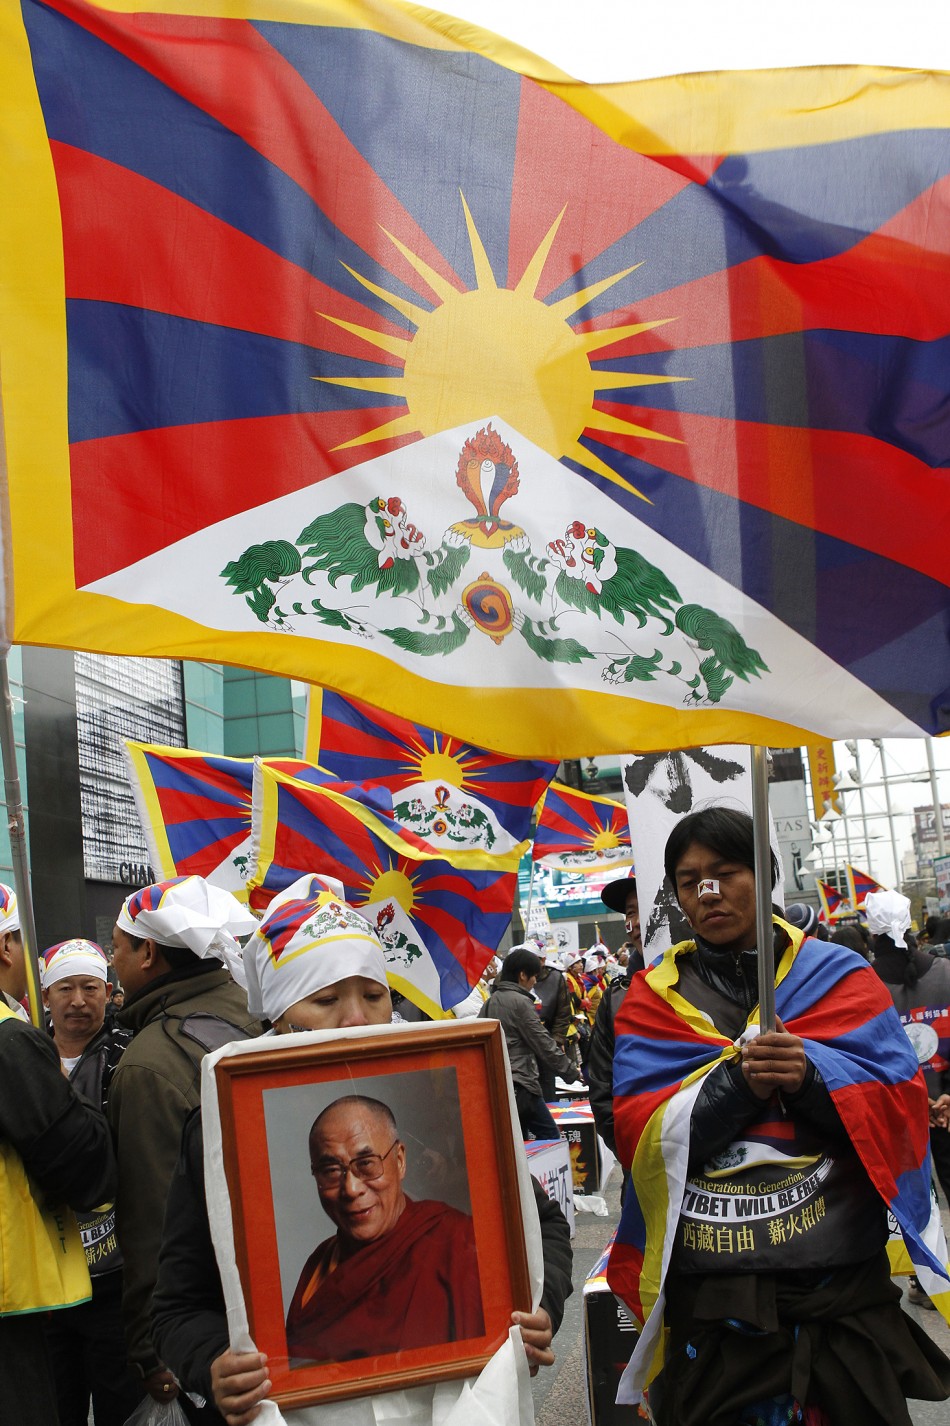 Activists holding a picture of the Dalai Lama and the Tibetan flags take part in a rally to support Tibet in Taipei